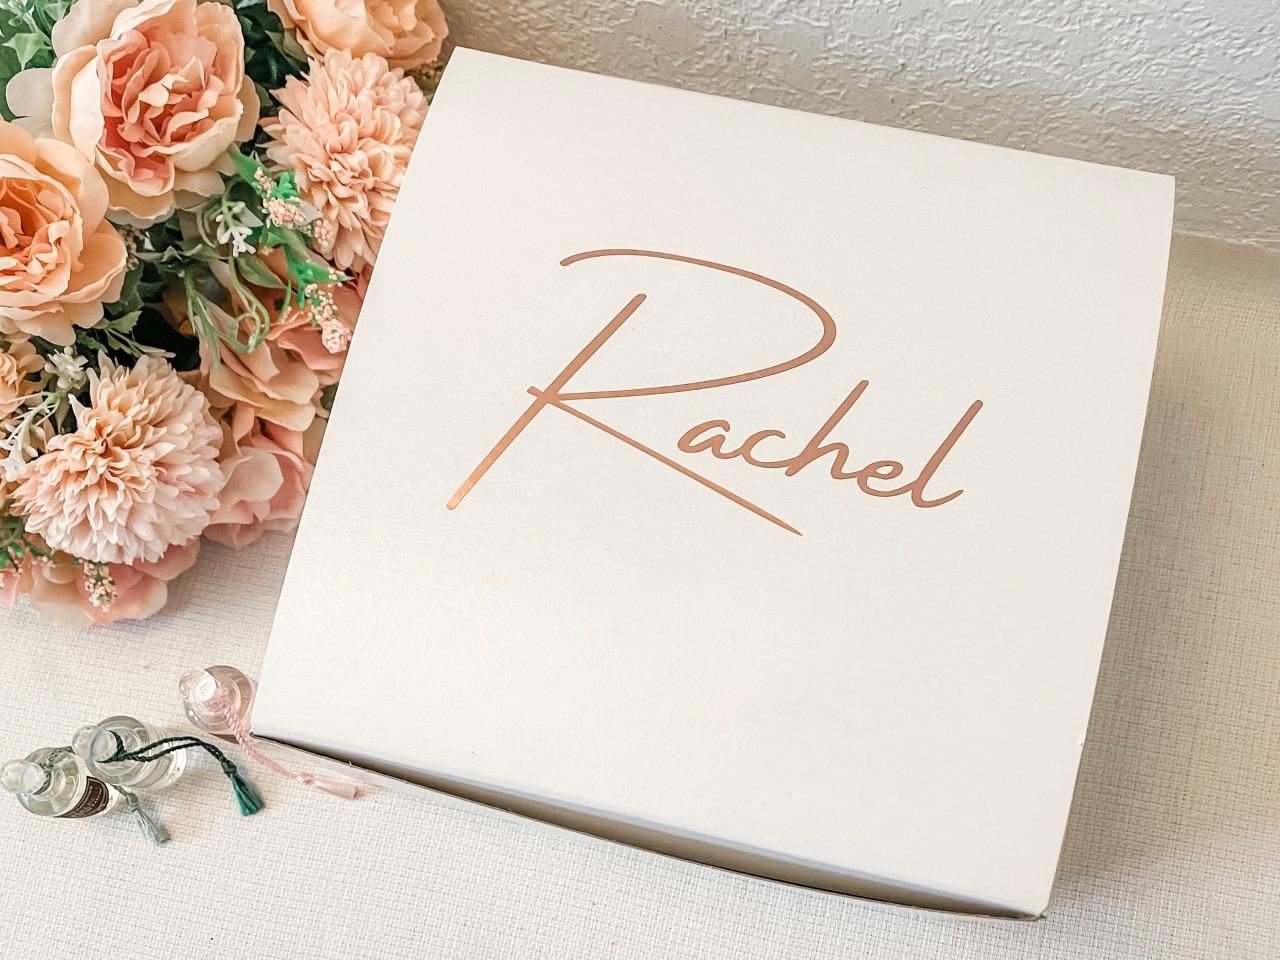 Empty Rose Gold Gift Boxes | Personalized Gift Box | Luxury Bridesmaid Proposal Box.